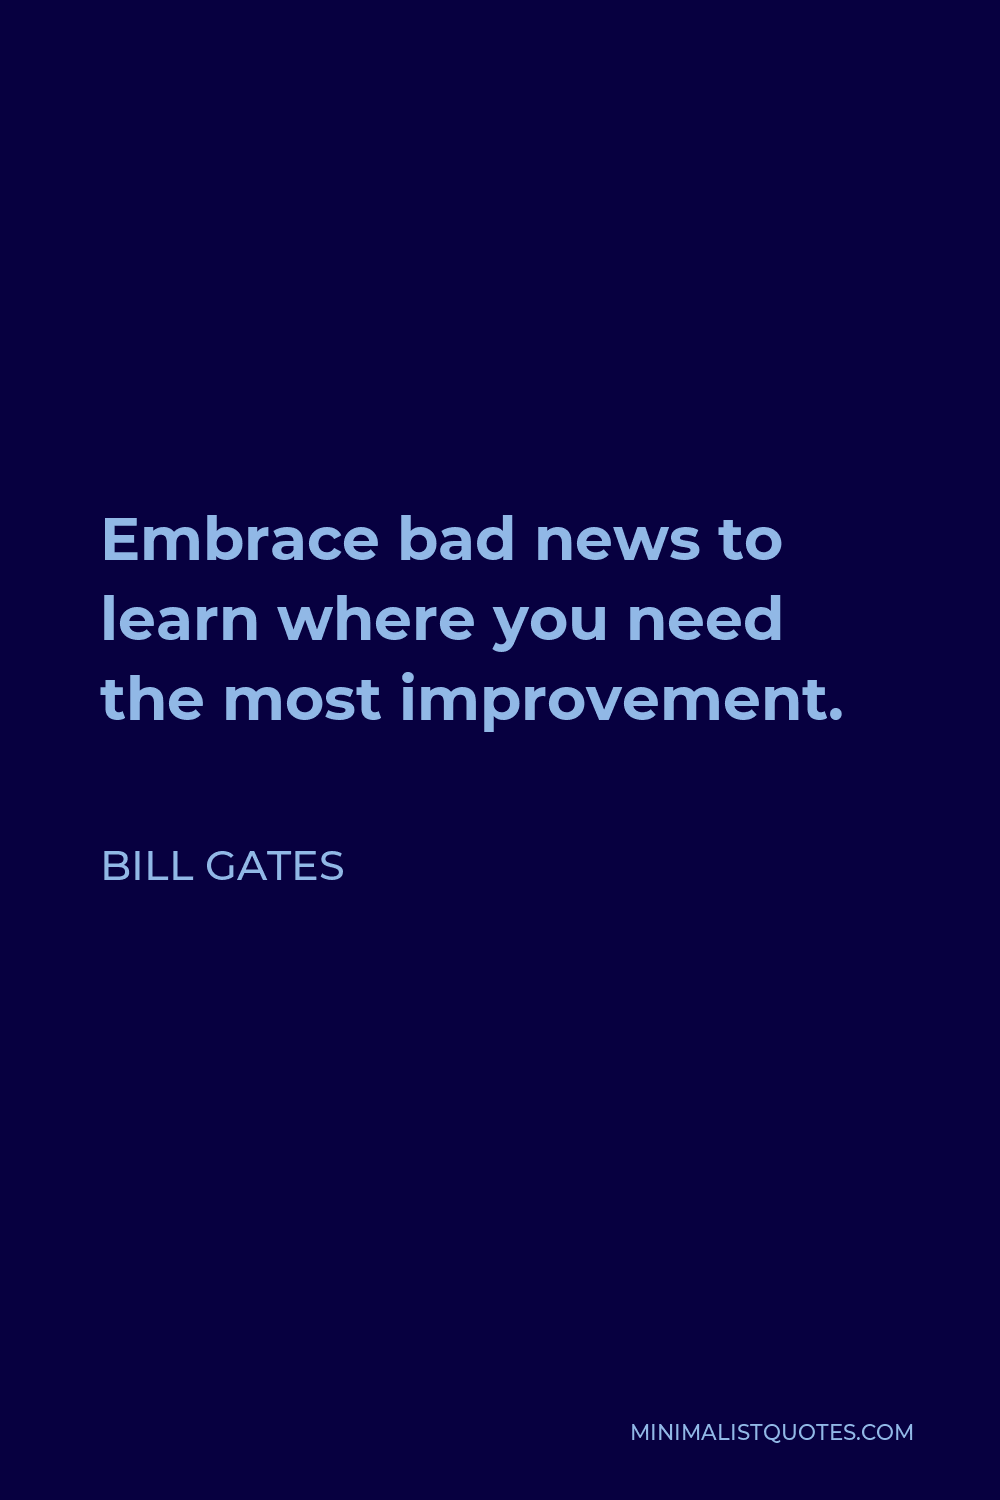 Bill Gates Quote - Embrace bad news to learn where you need the most improvement.